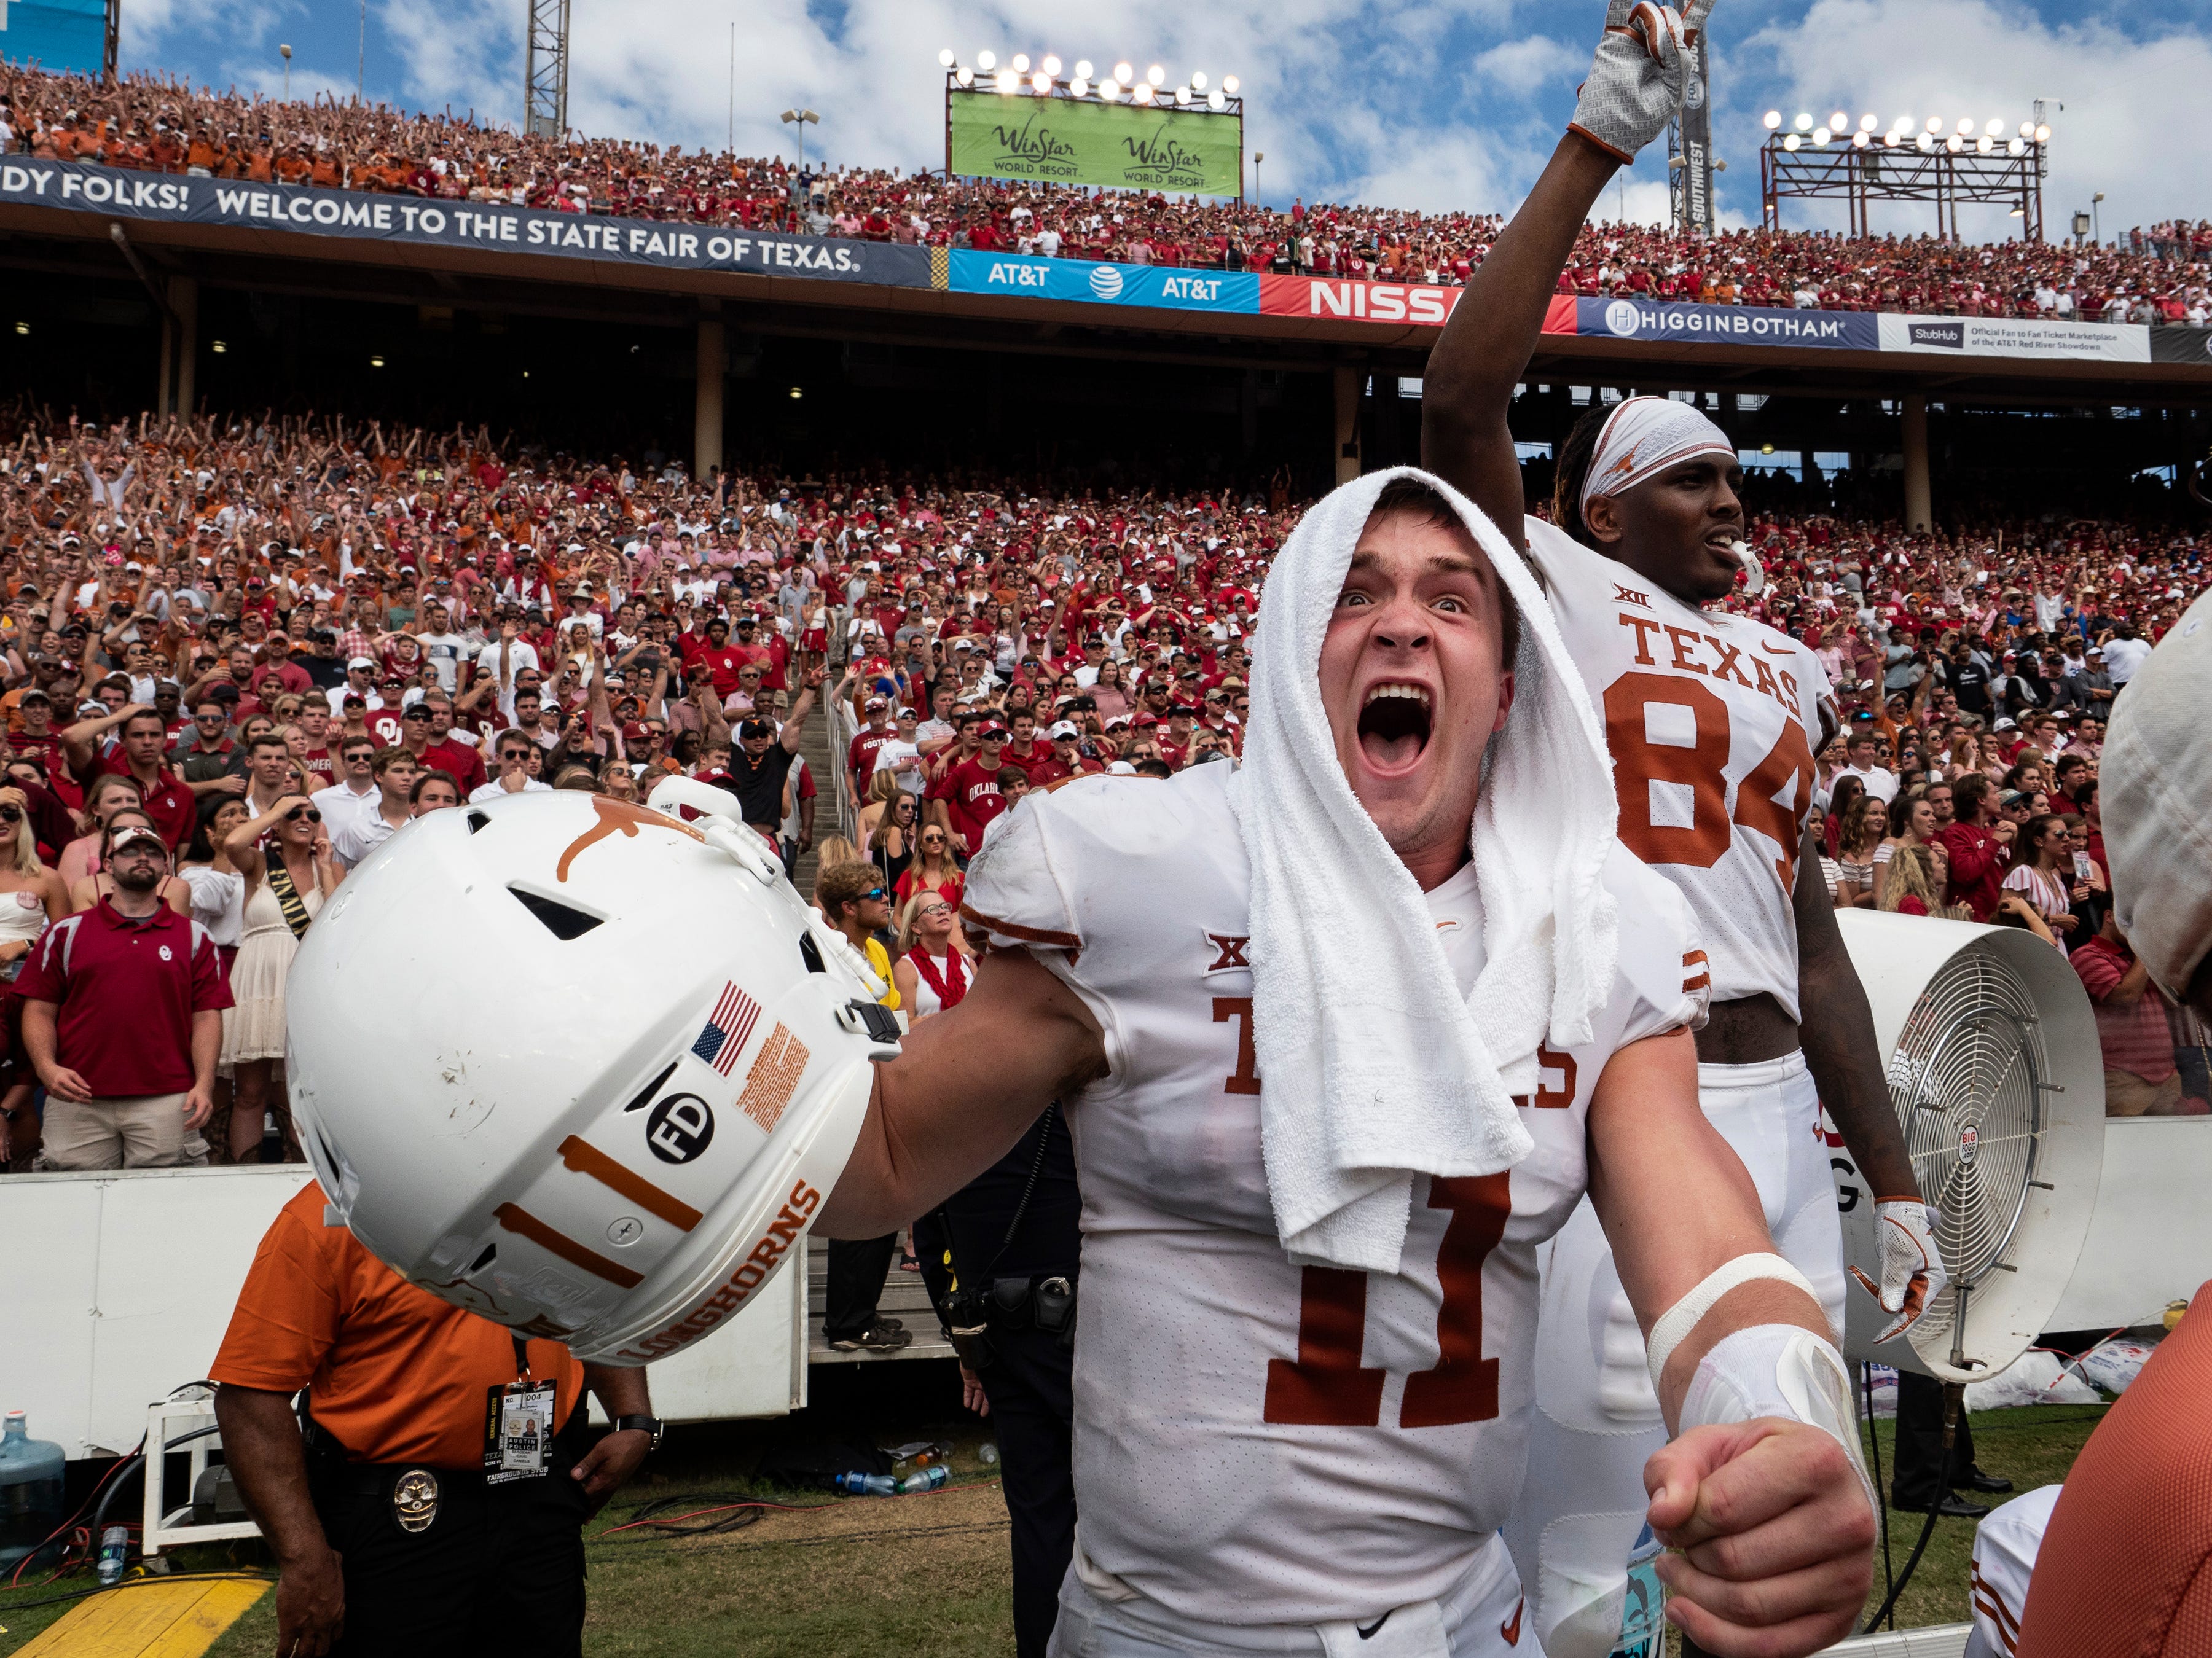 TexasOklahoma game at Cotton Bowl Stadium, explained Why Red River